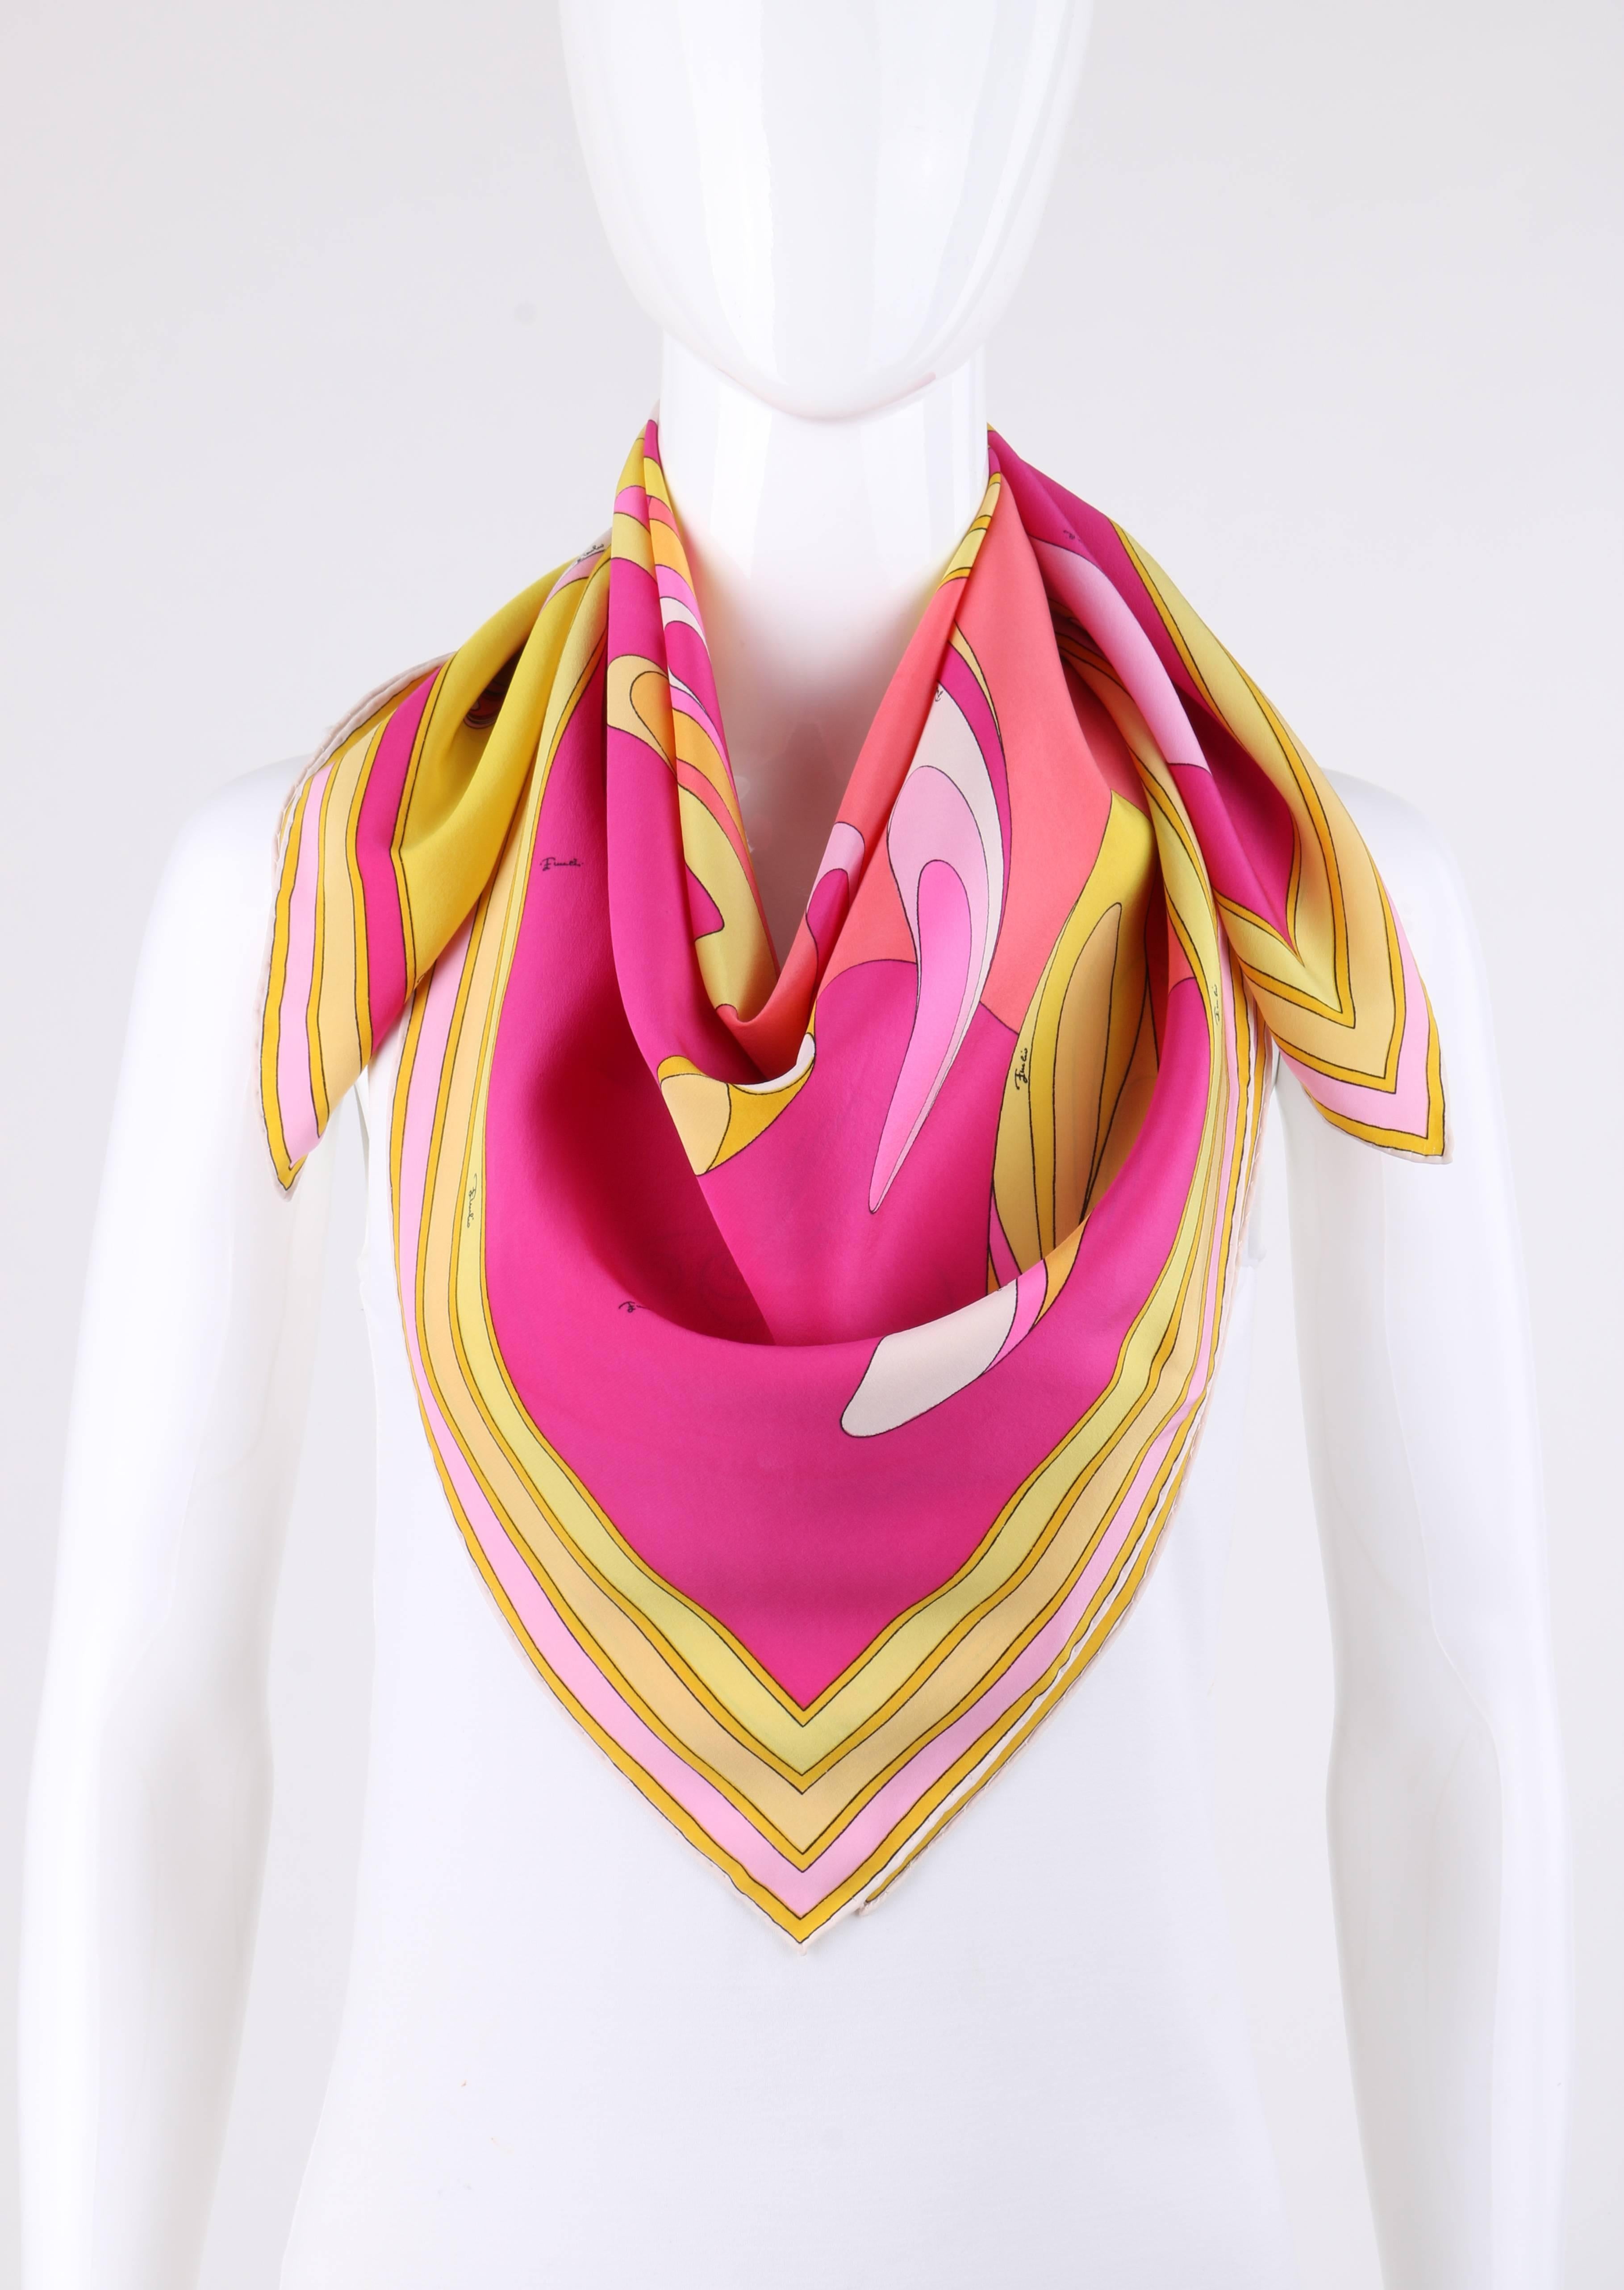 Vintage Emilio Pucci c.1960's yellow multi-color op art bubble signature print silk scarf. Op art signature bubble windowpane print in shades of yellow, pink, and white. Multi-color striped boarder. Fuschia and salmon pink color block background at